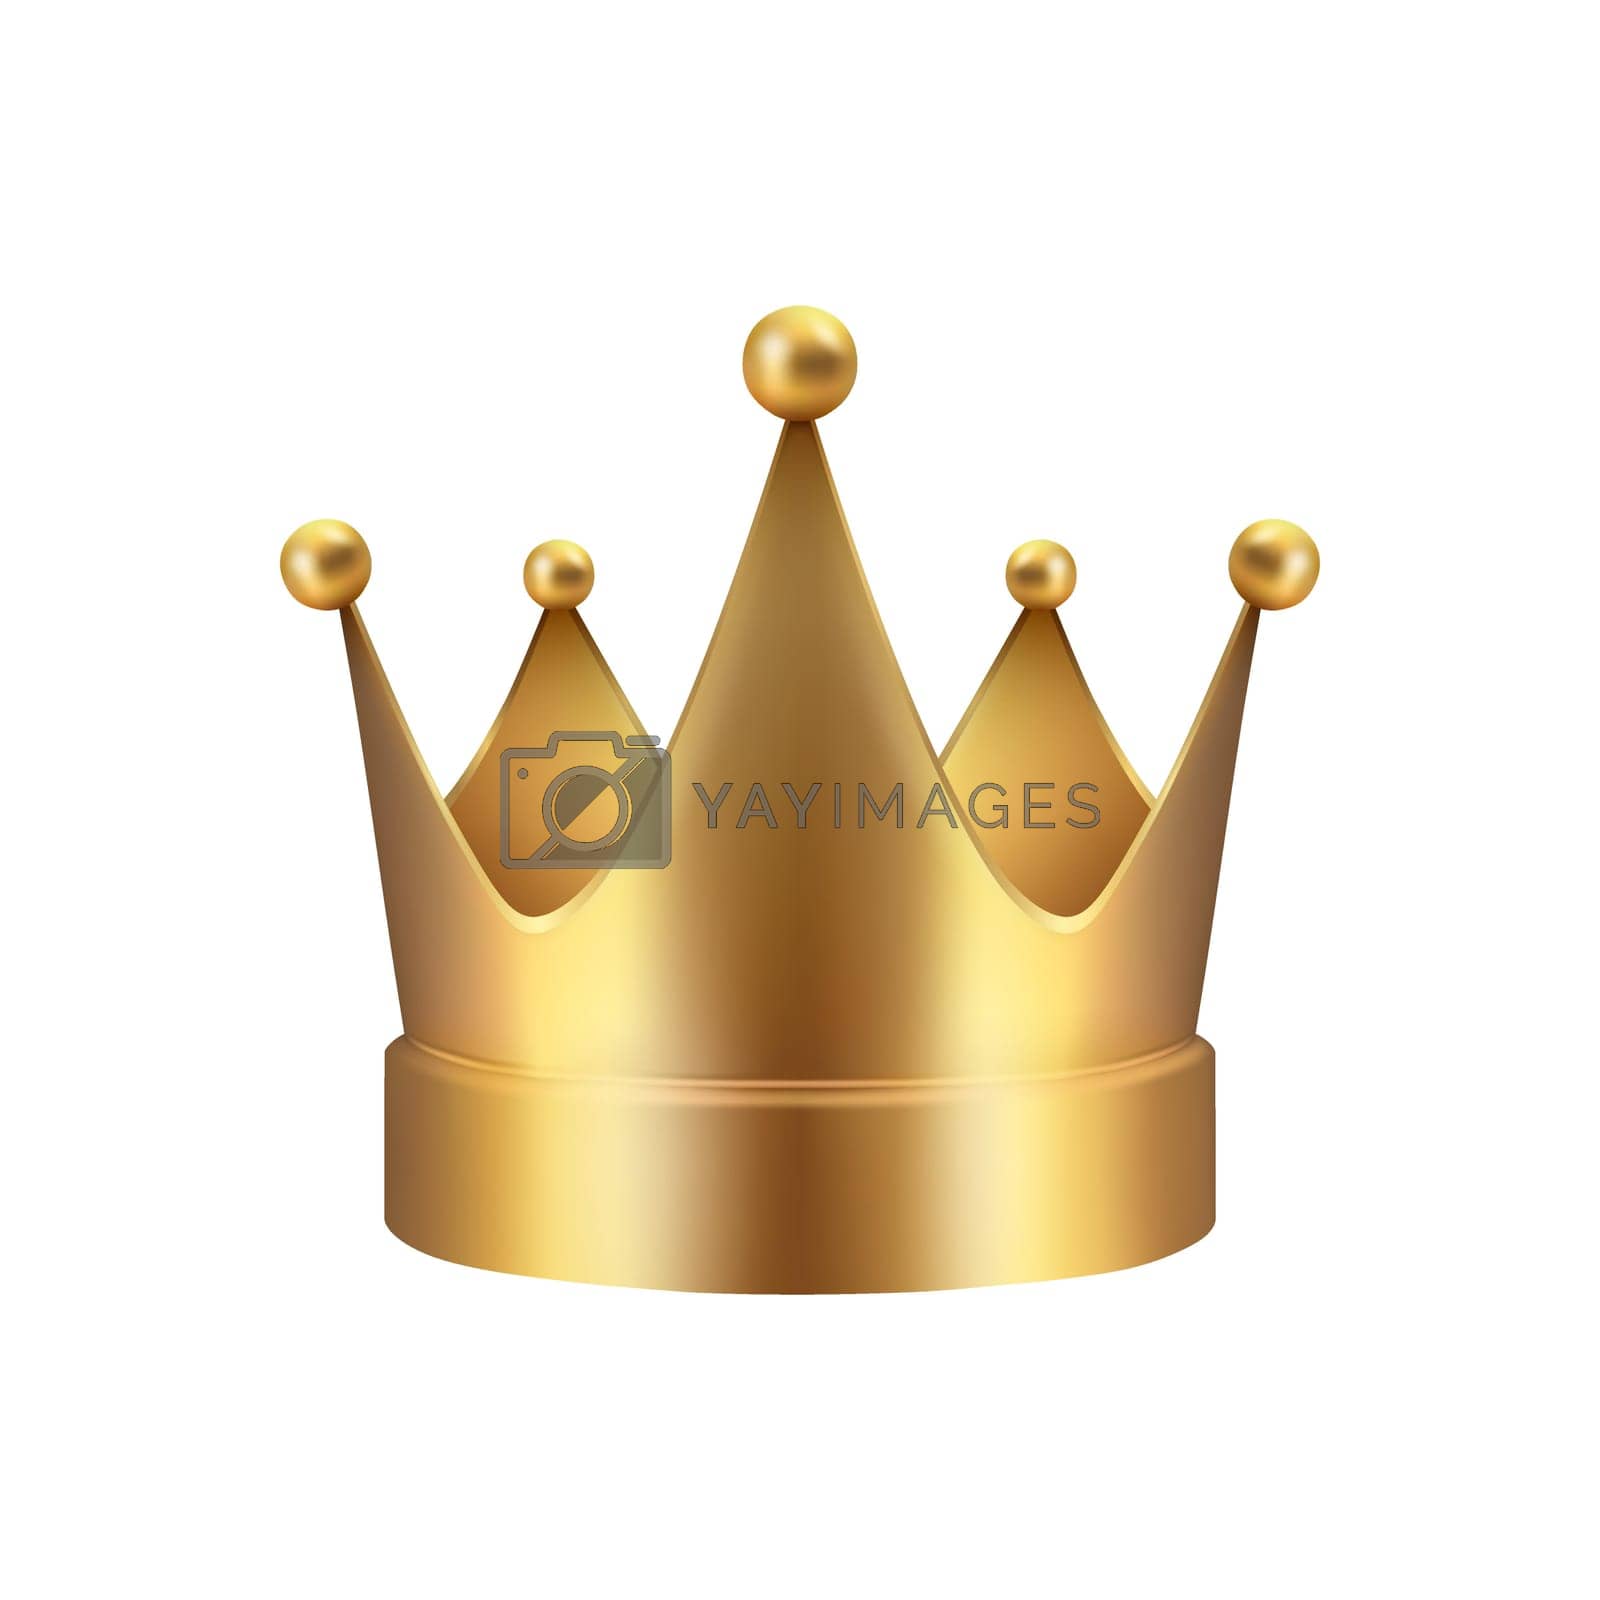 Royalty free image of Vector 3d Realistic Golden Crown Icon Closeup Isolated. Yellow Metallic Crown Design Template. Gold Royal King Crown. Symbol of Imperial Power. Luxury, Wealth and Power. Front View by Gomolach